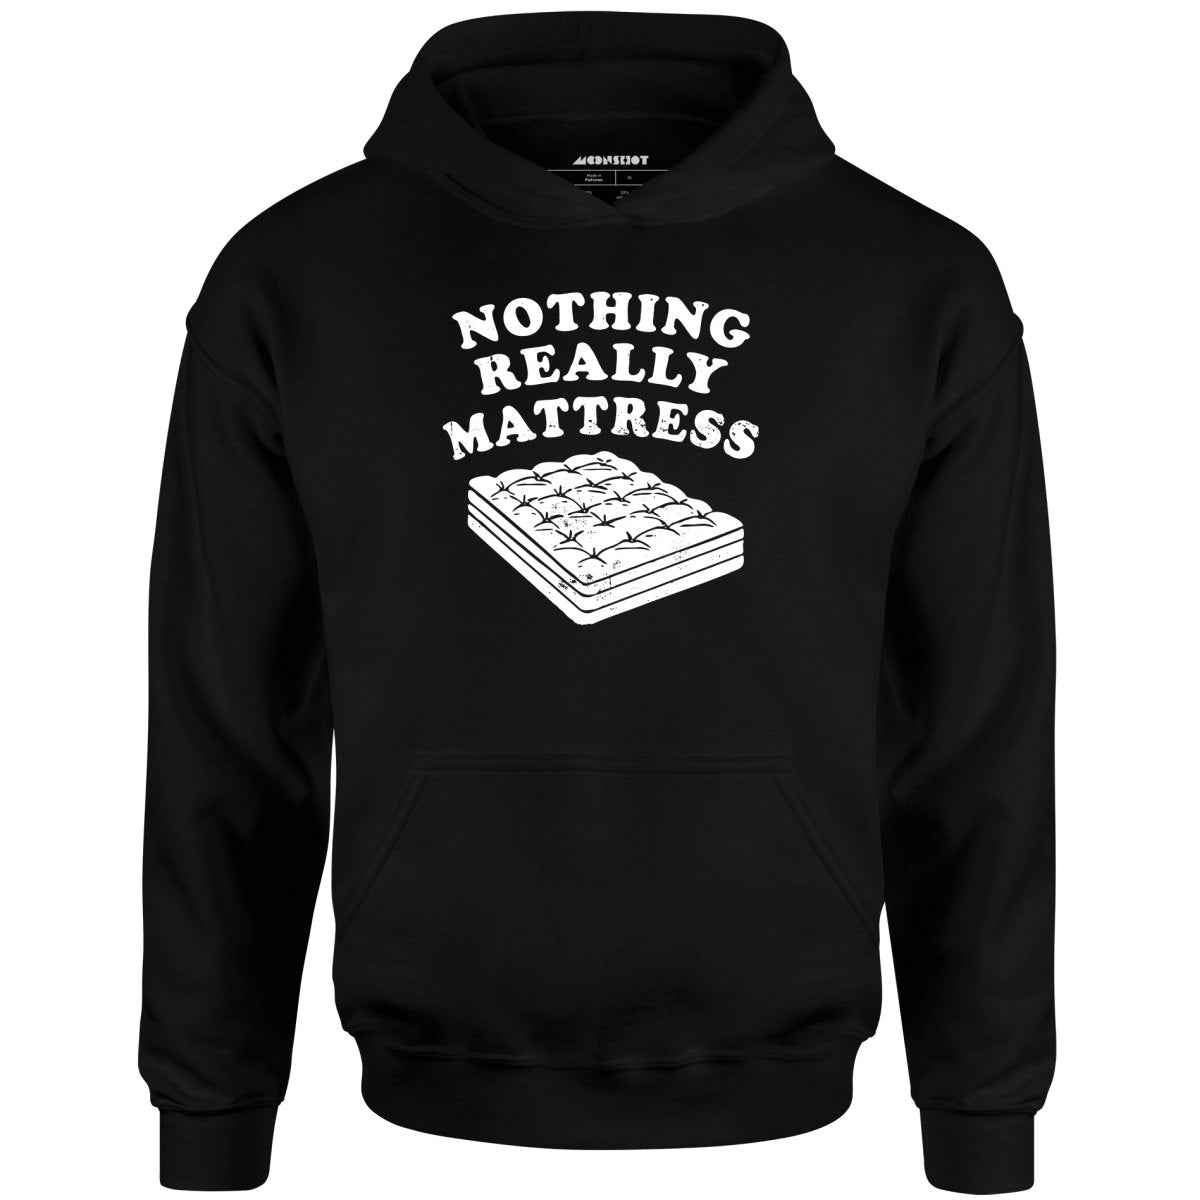 Nothing Really Mattress - Unisex Hoodie